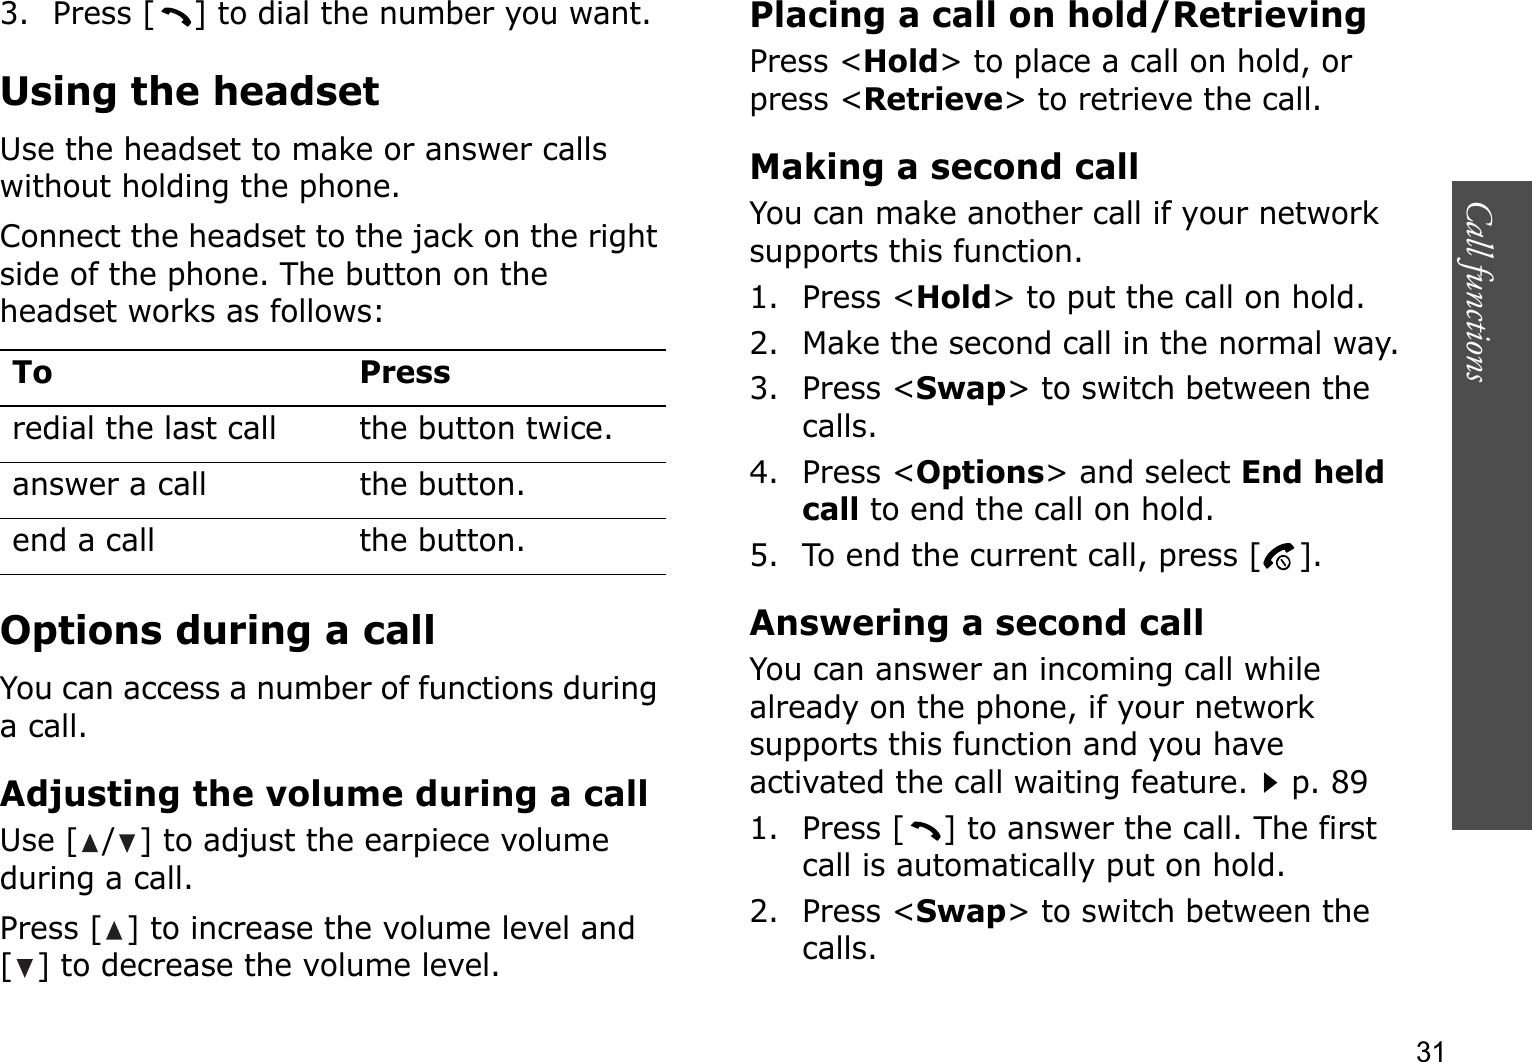 Call functions    313. Press [ ] to dial the number you want.Using the headsetUse the headset to make or answer calls without holding the phone. Connect the headset to the jack on the right side of the phone. The button on the headset works as follows:Options during a callYou can access a number of functions during a call.Adjusting the volume during a callUse [ / ] to adjust the earpiece volume during a call.Press [ ] to increase the volume level and [ ] to decrease the volume level.Placing a call on hold/RetrievingPress &lt;Hold&gt; to place a call on hold, or press &lt;Retrieve&gt; to retrieve the call.Making a second callYou can make another call if your network supports this function.1. Press &lt;Hold&gt; to put the call on hold.2. Make the second call in the normal way.3. Press &lt;Swap&gt; to switch between the calls.4. Press &lt;Options&gt; and select End heldcall to end the call on hold.5. To end the current call, press [ ].Answering a second callYou can answer an incoming call while already on the phone, if your network supports this function and you have activated the call waiting feature.p. 89 1. Press [ ] to answer the call. The first call is automatically put on hold.2. Press &lt;Swap&gt; to switch between the calls.To Pressredial the last call the button twice.answer a call the button.end a call the button.